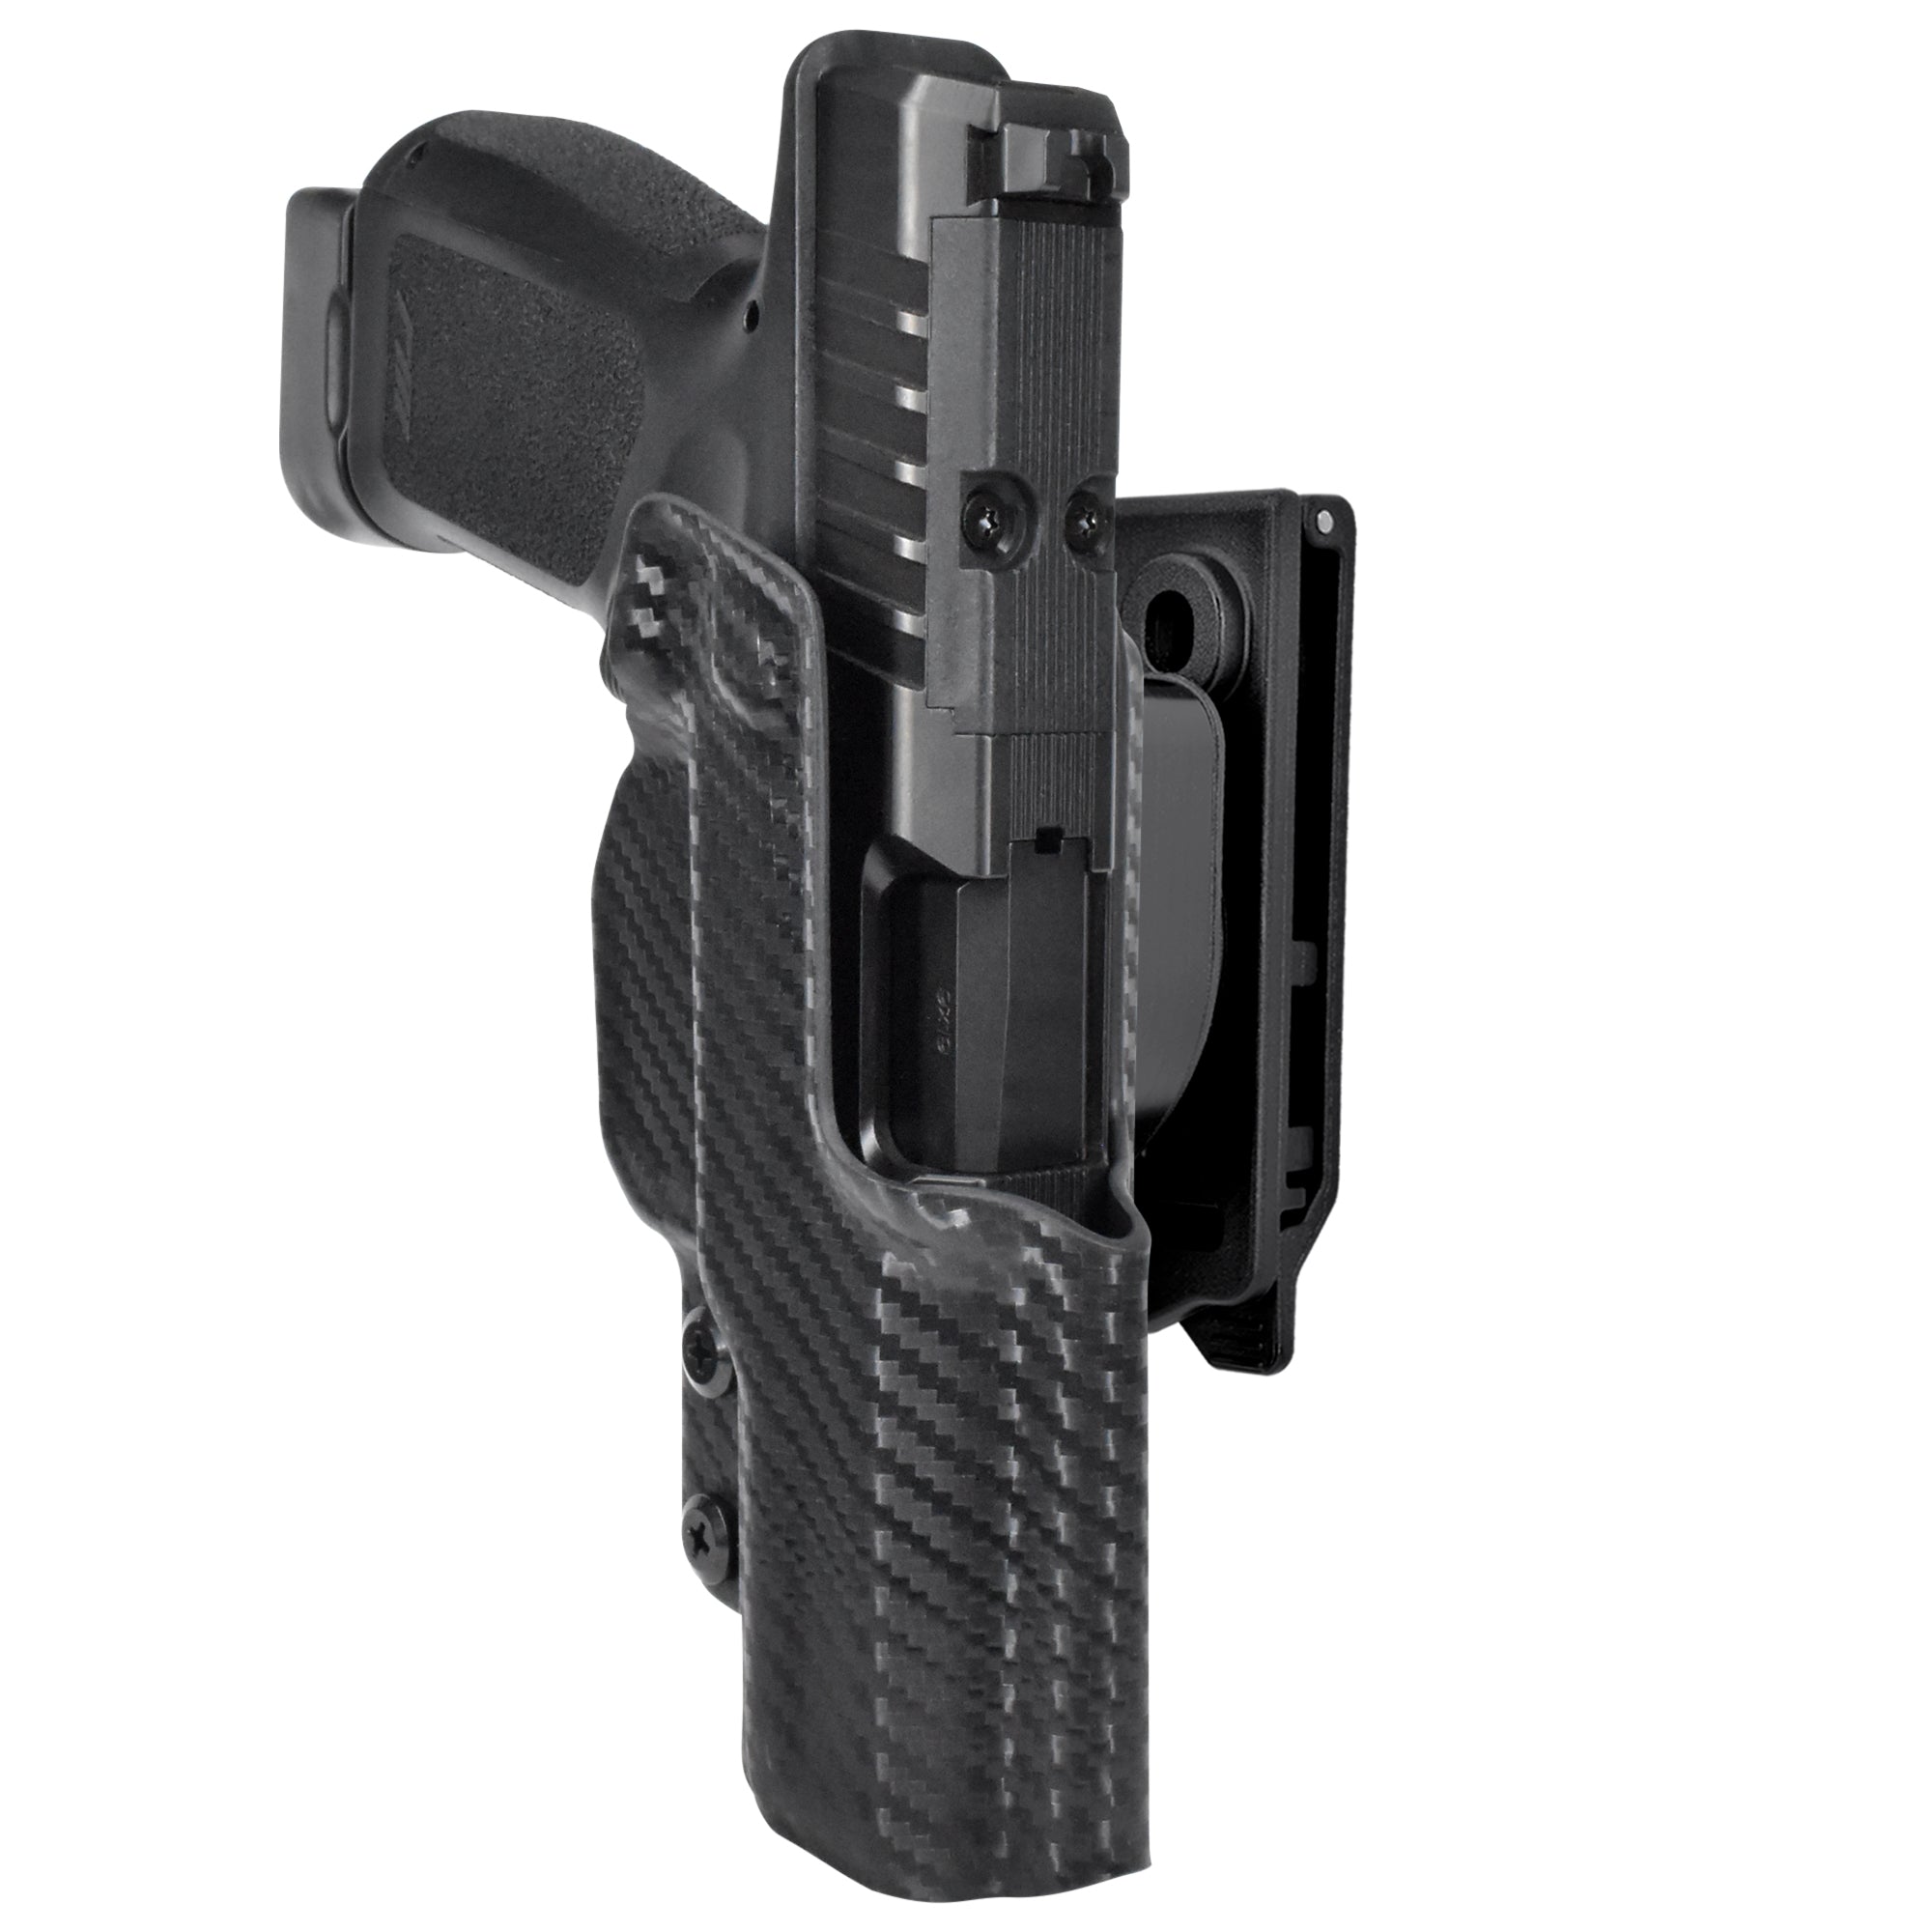 Rost Martin RM1C Quick Release IDPA Holster in Carbon Fiber